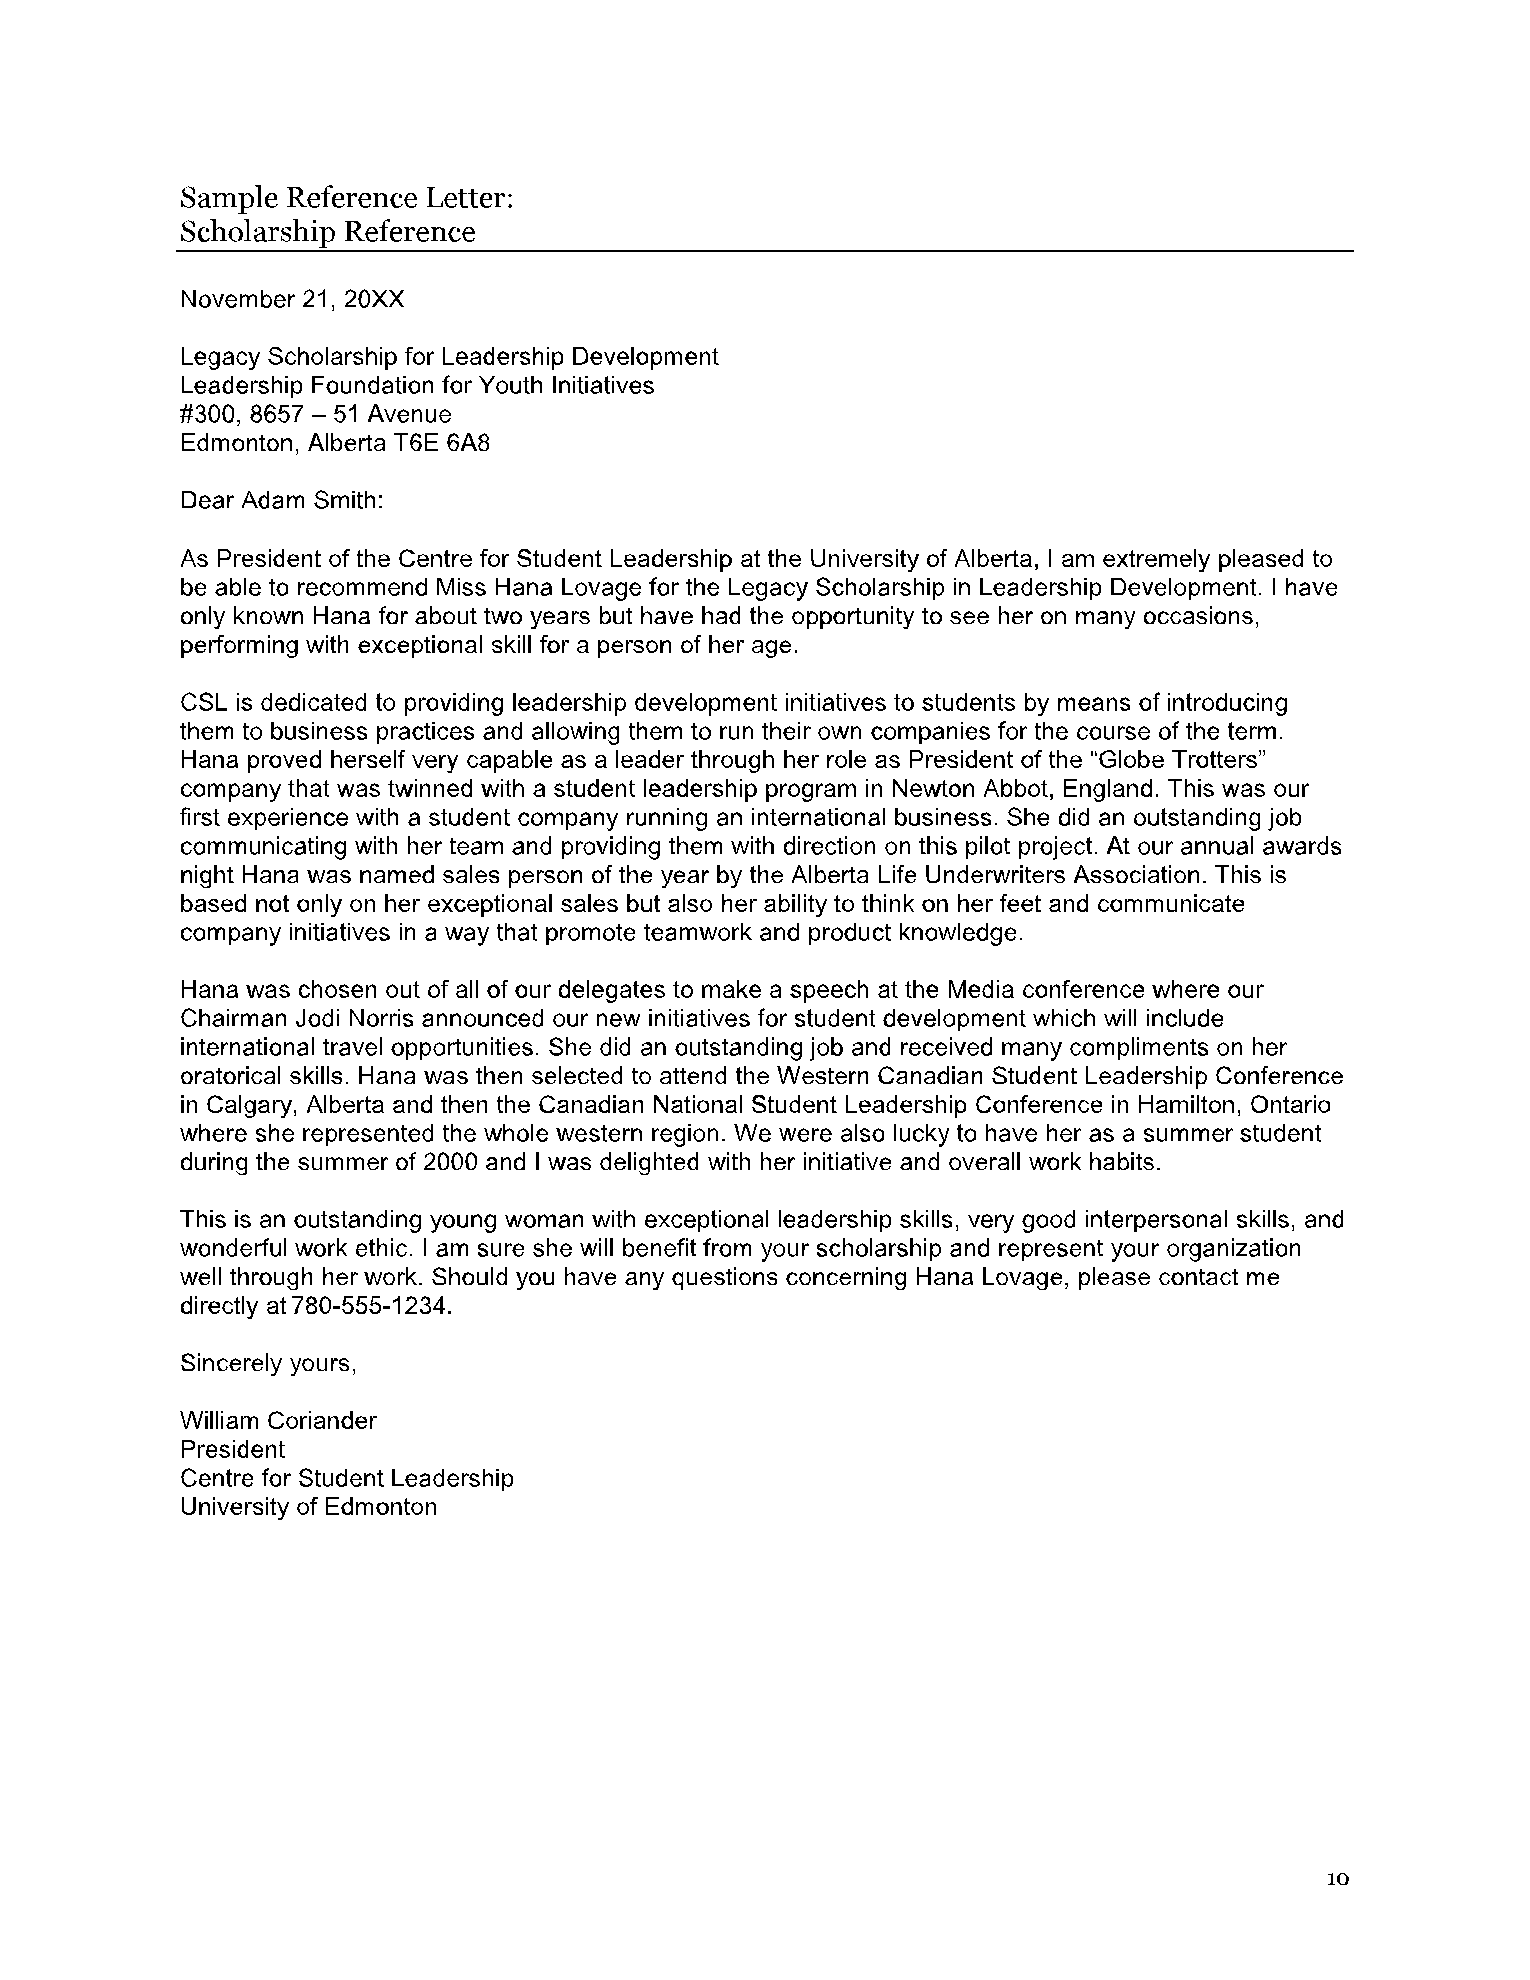 Letter of Recommendation for Immigration 10